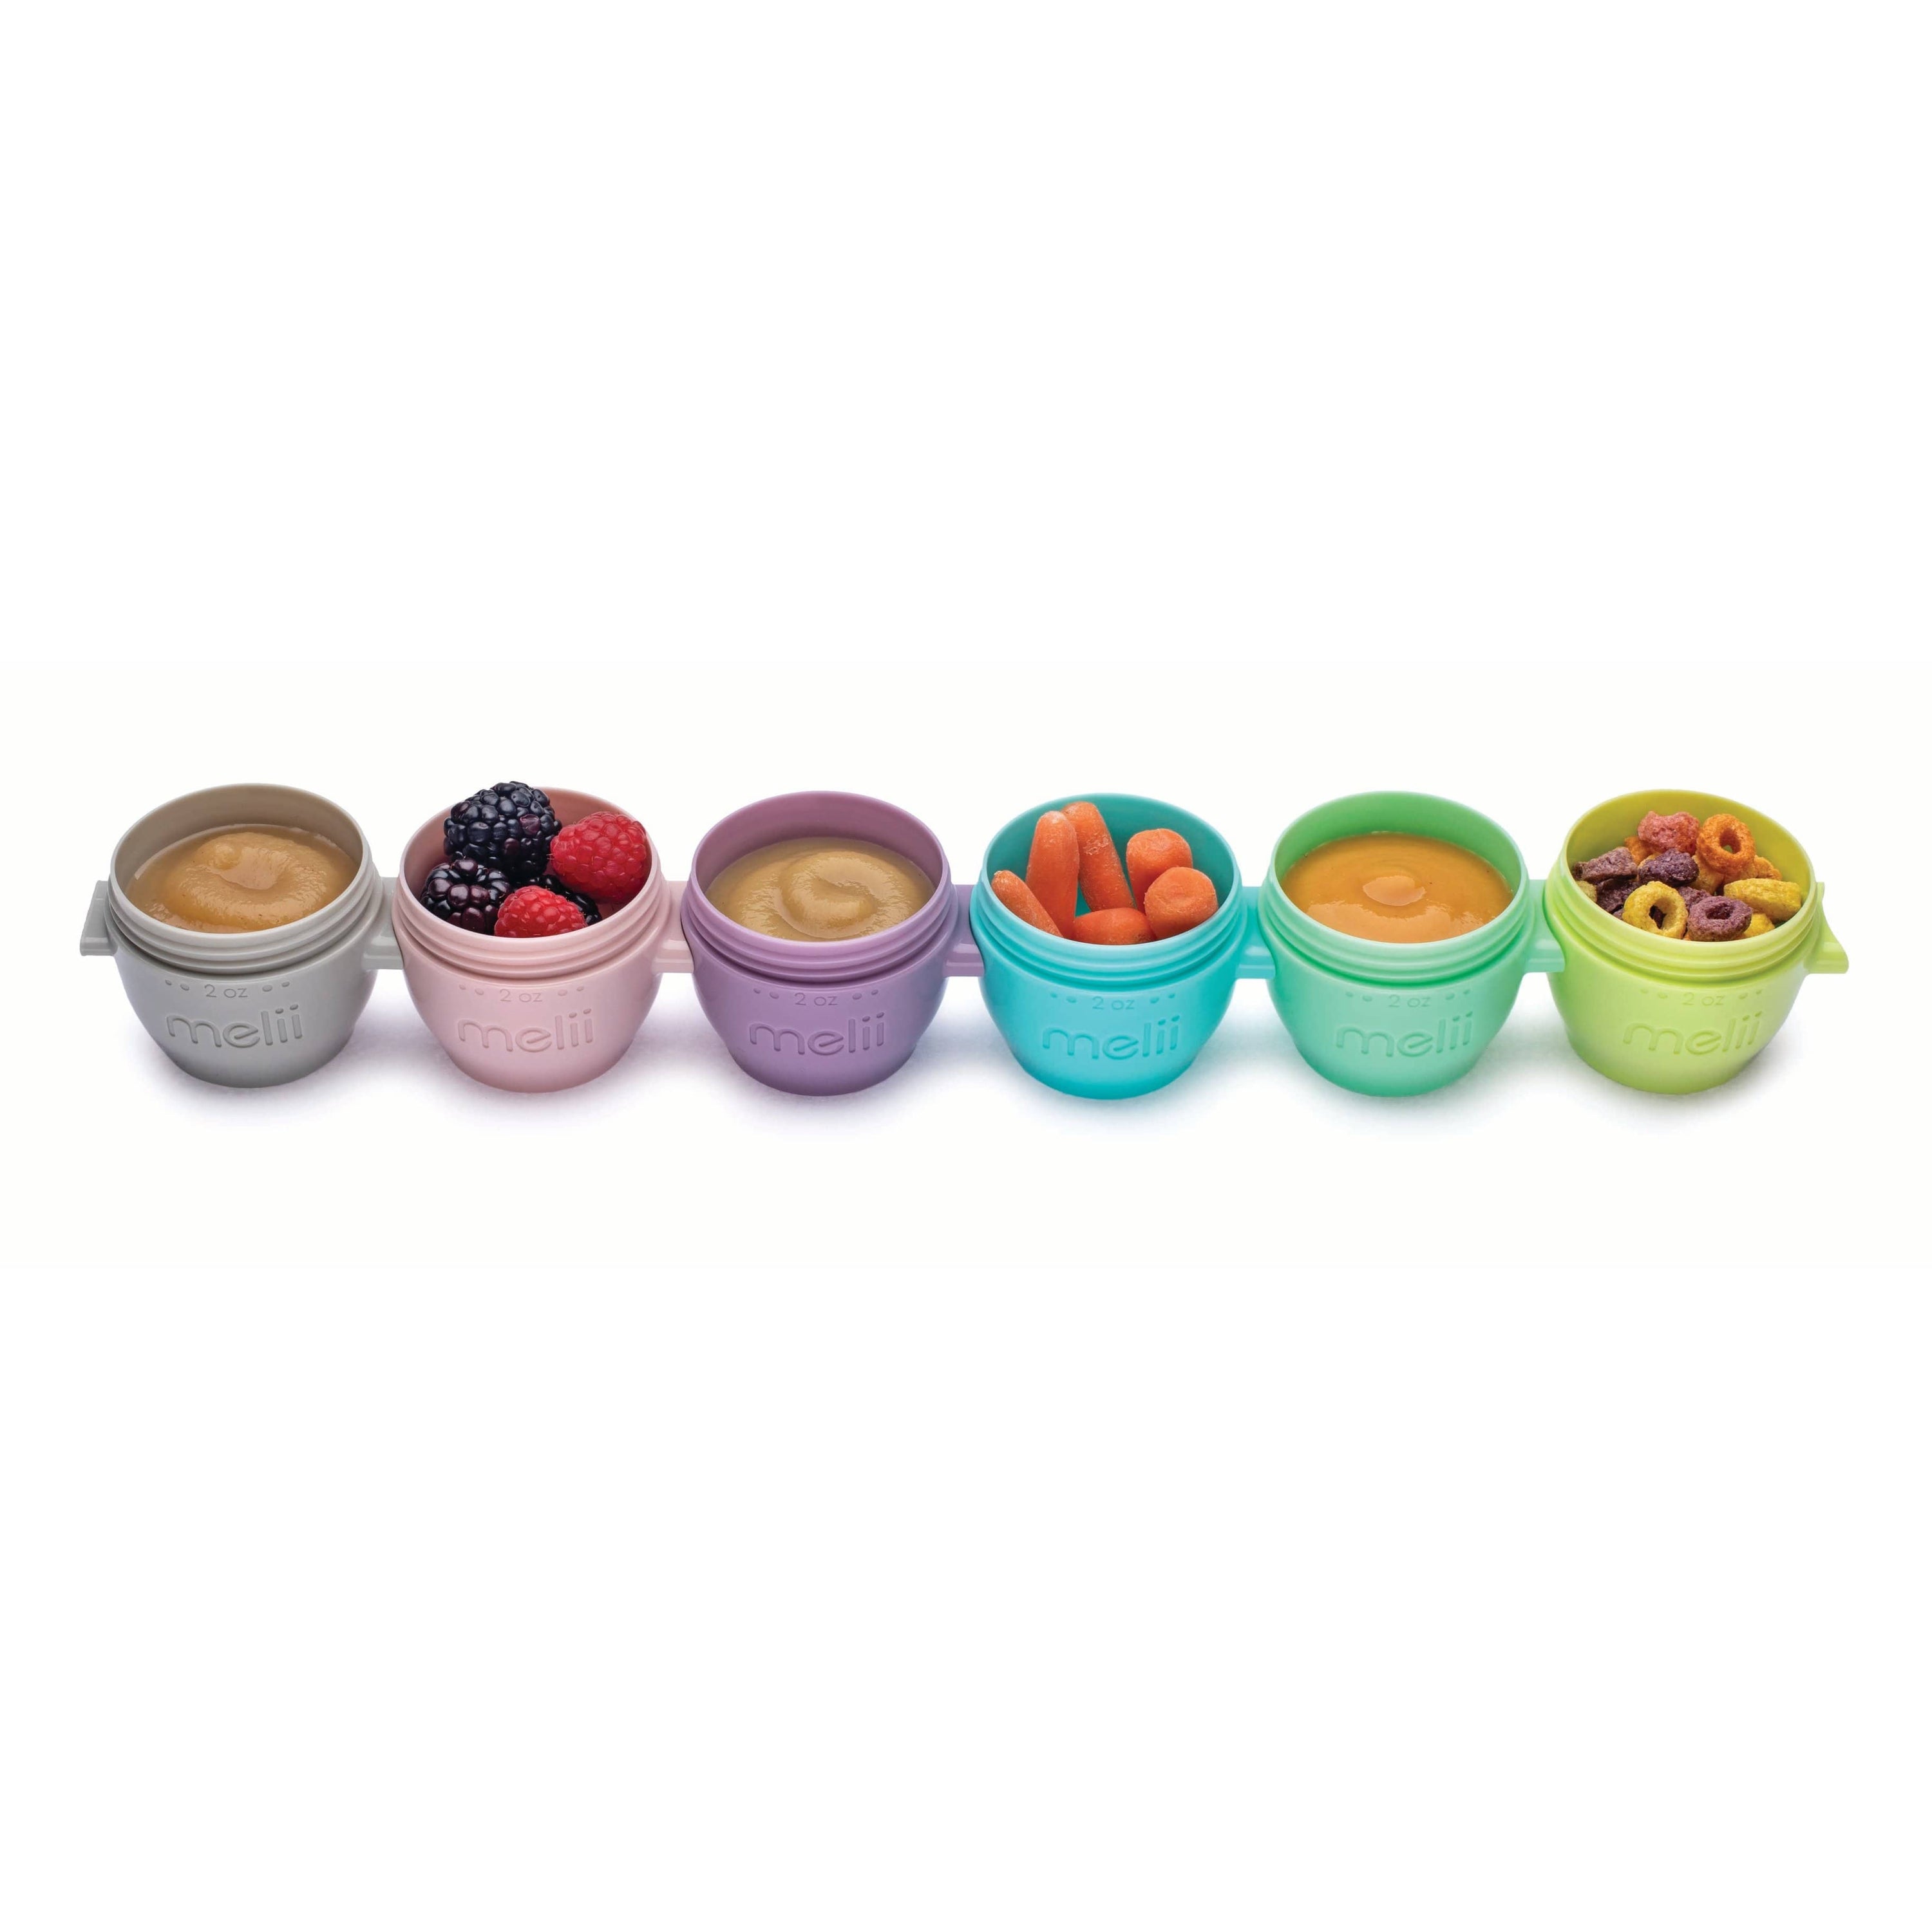 Melii melii Snap & go Baby Food Storage containers with lids